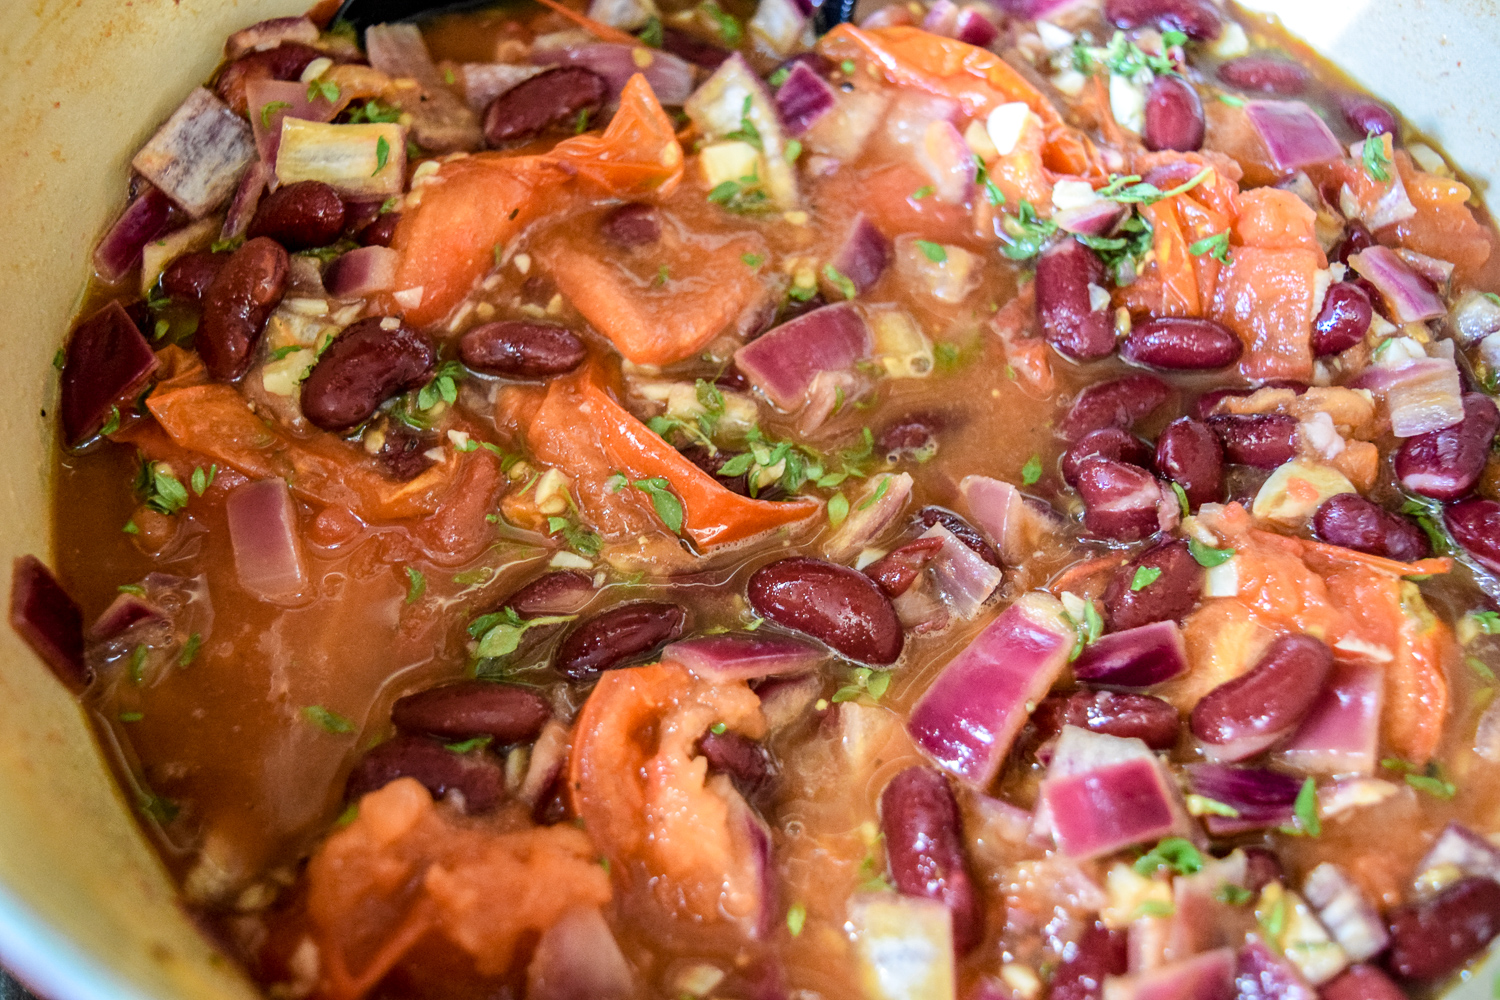 Roasted tomatoes, red onions, garlic, and kidney beans before simmering in oven with thyme herb for Egg-White Chili Shakshuka